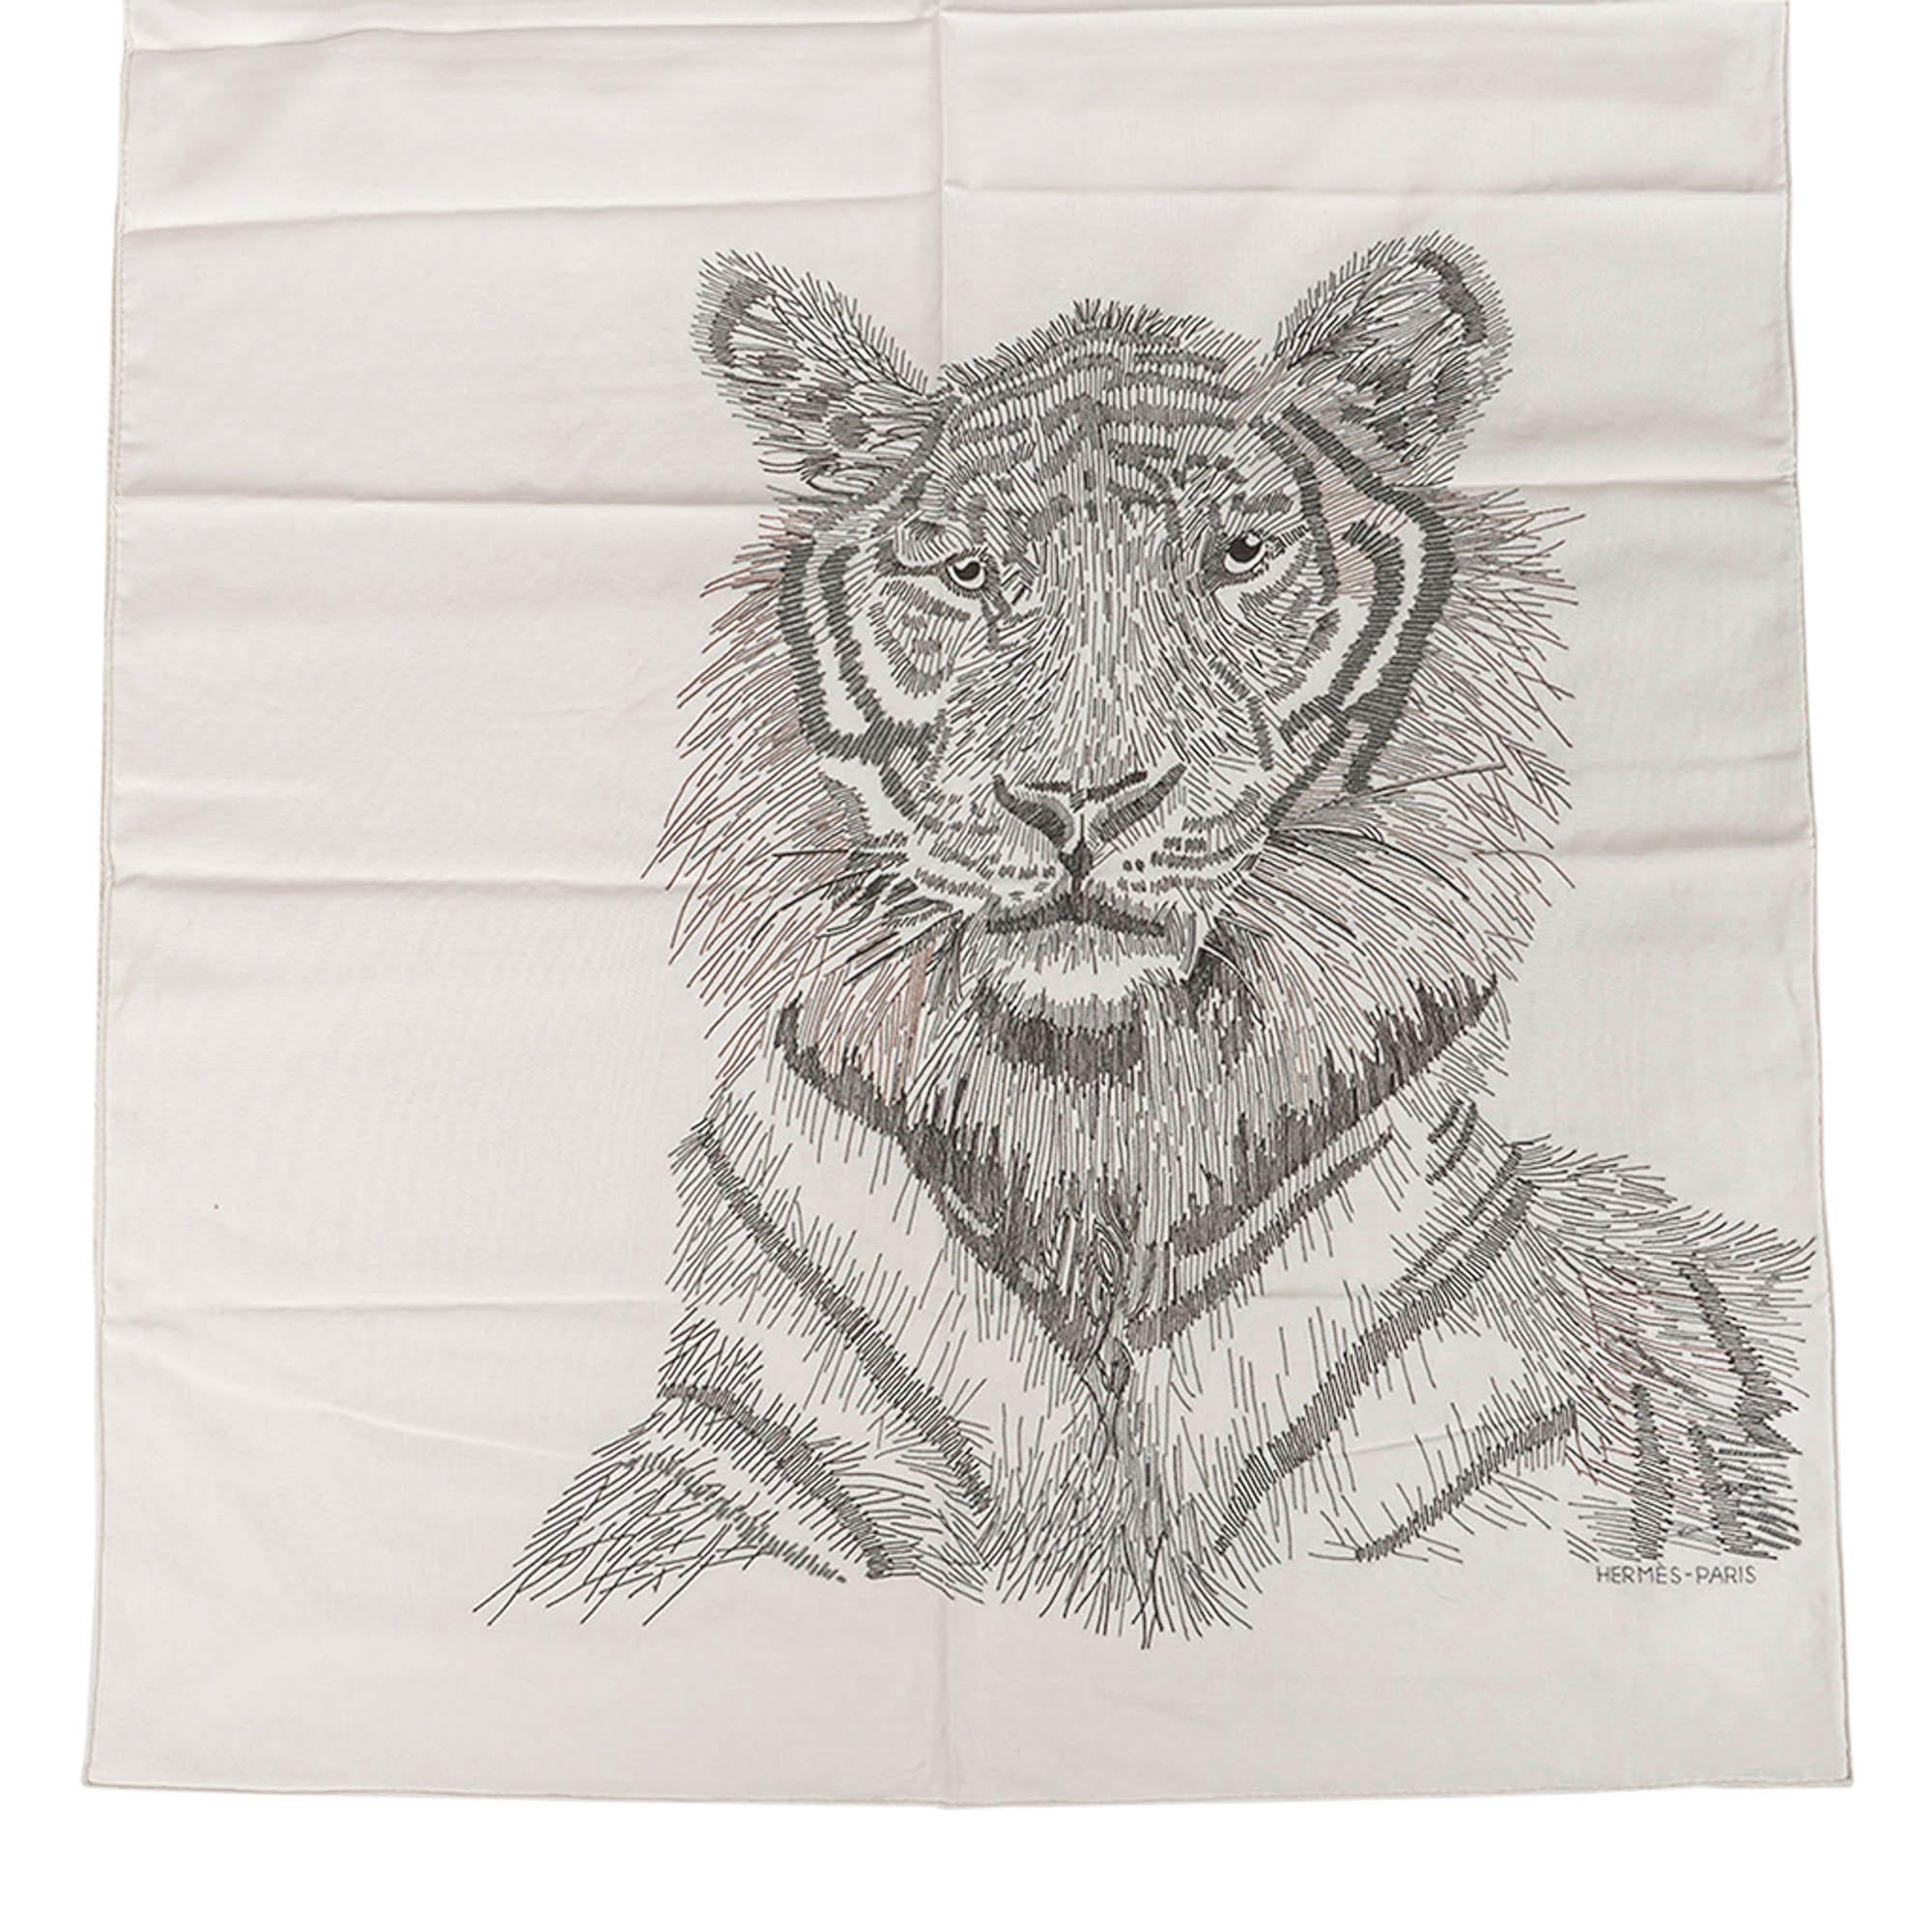 Hermes Tigre Royal Embroidered Stole Limited Edition Silk Scarf In New Condition For Sale In Miami, FL